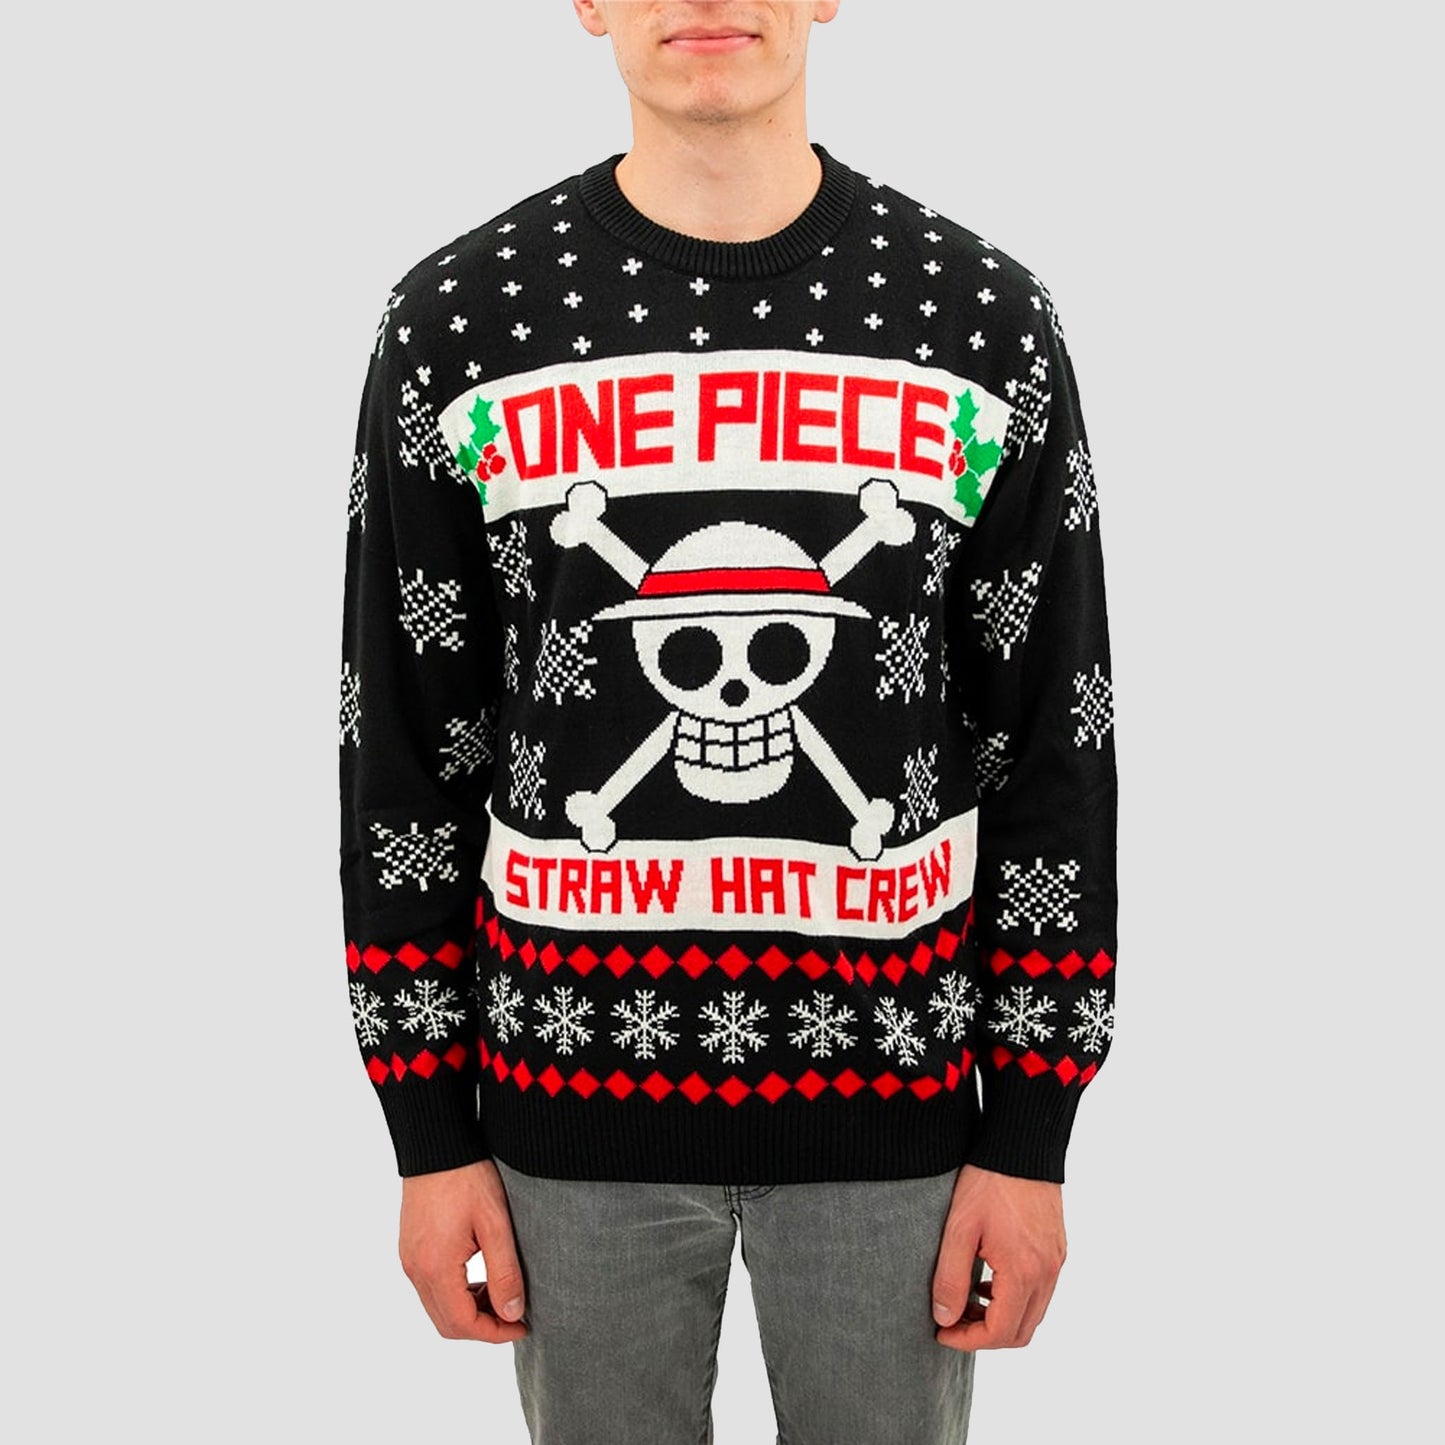 Straw Hat Crew With Jolly Roger (One Piece) Holiday Fleece Sweater